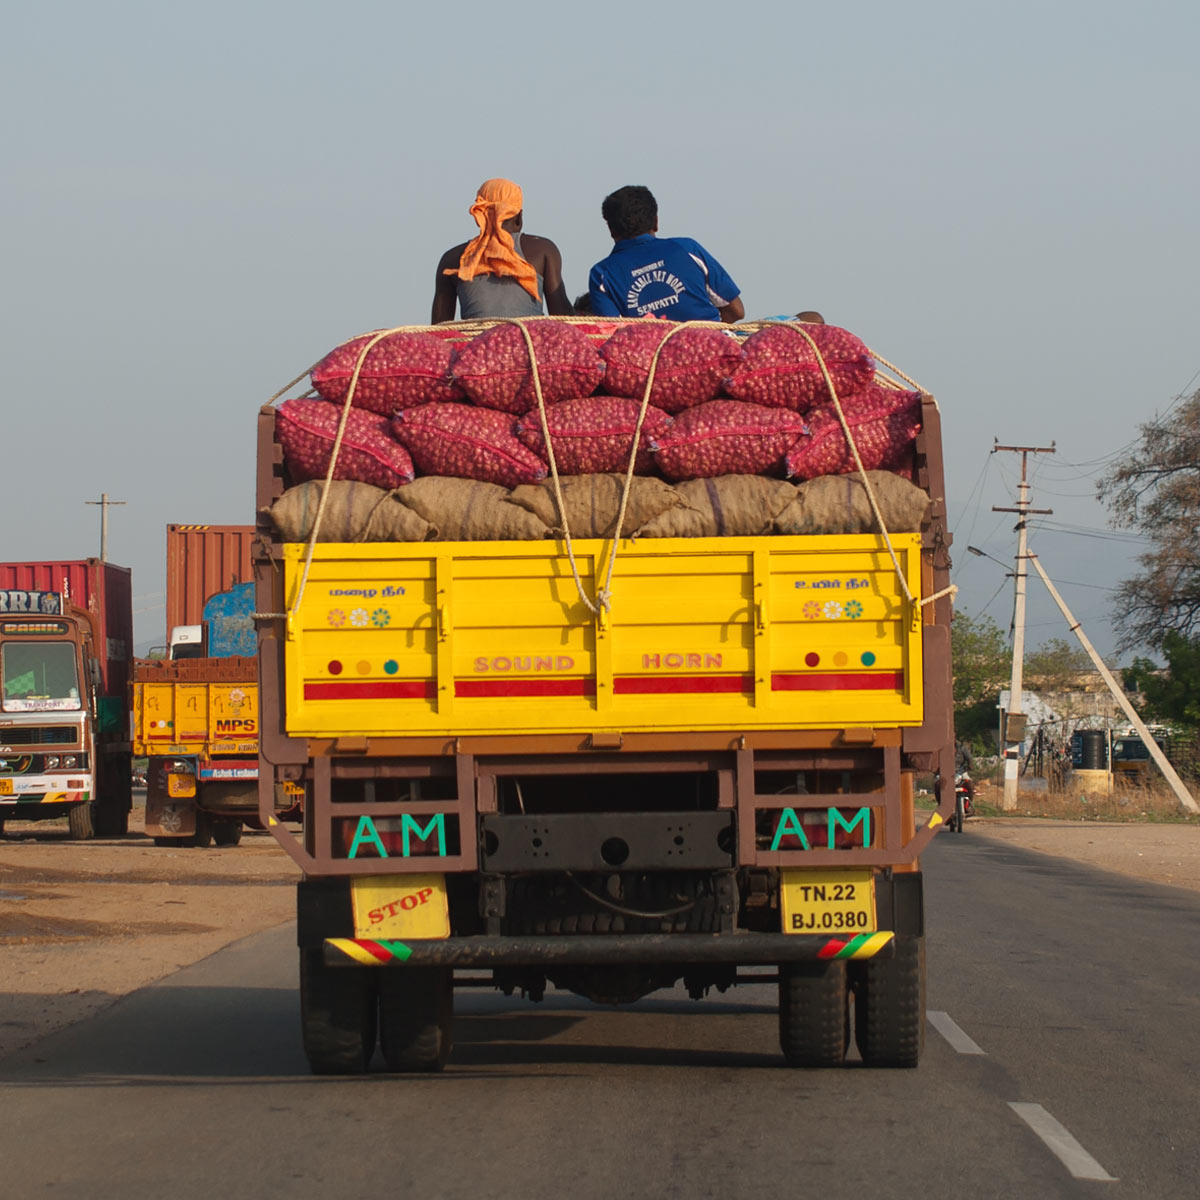 two guys sitting on a truck loaded with onions